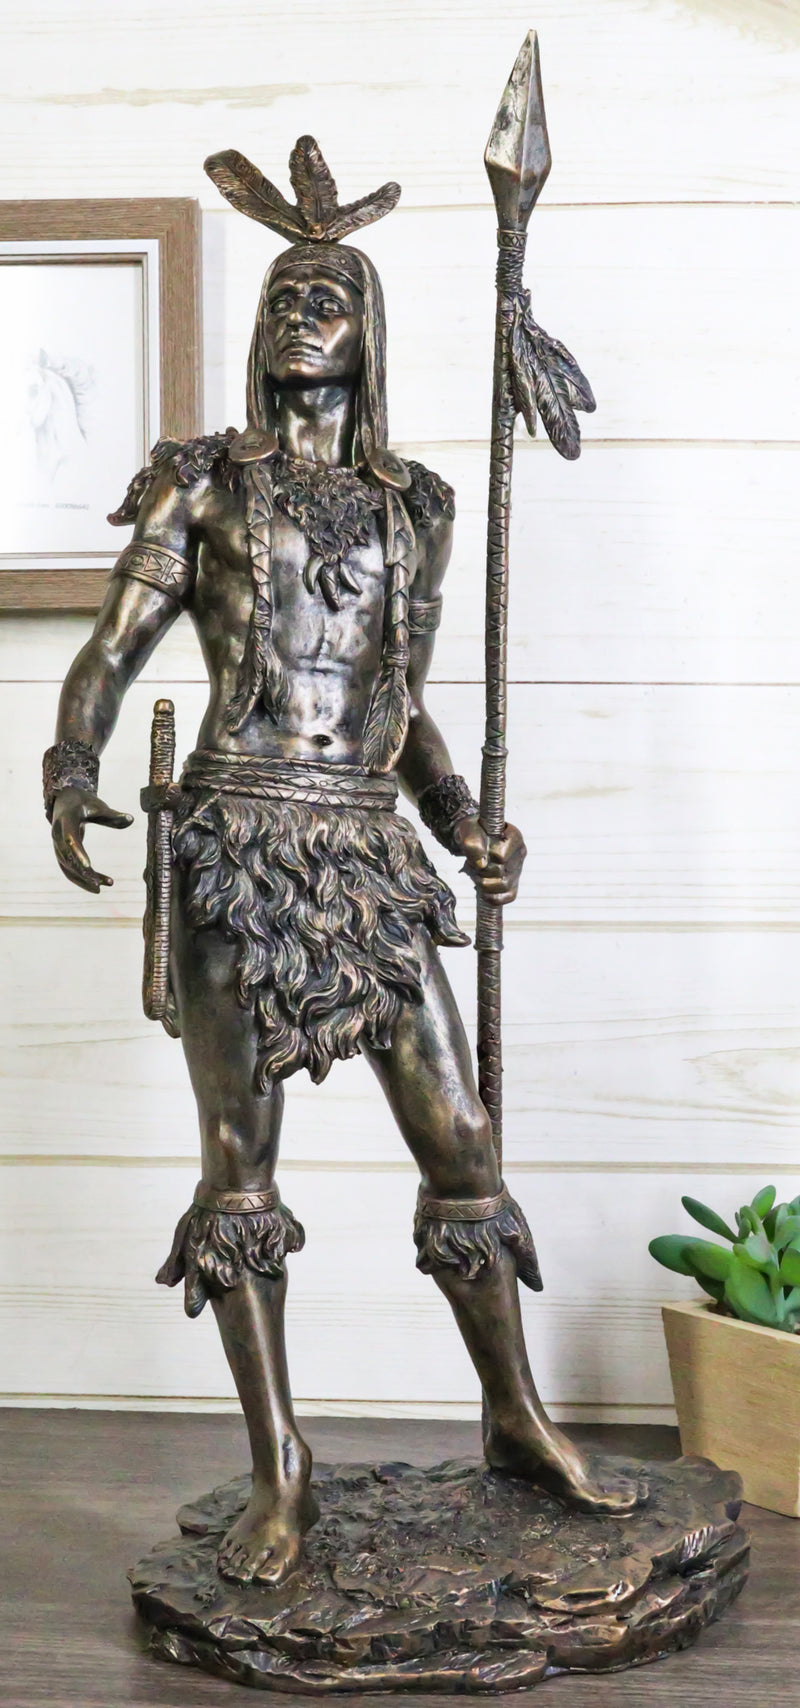 19" H Native American Indian Tribal Warrior Hunter Chief Holding Spear Figurine